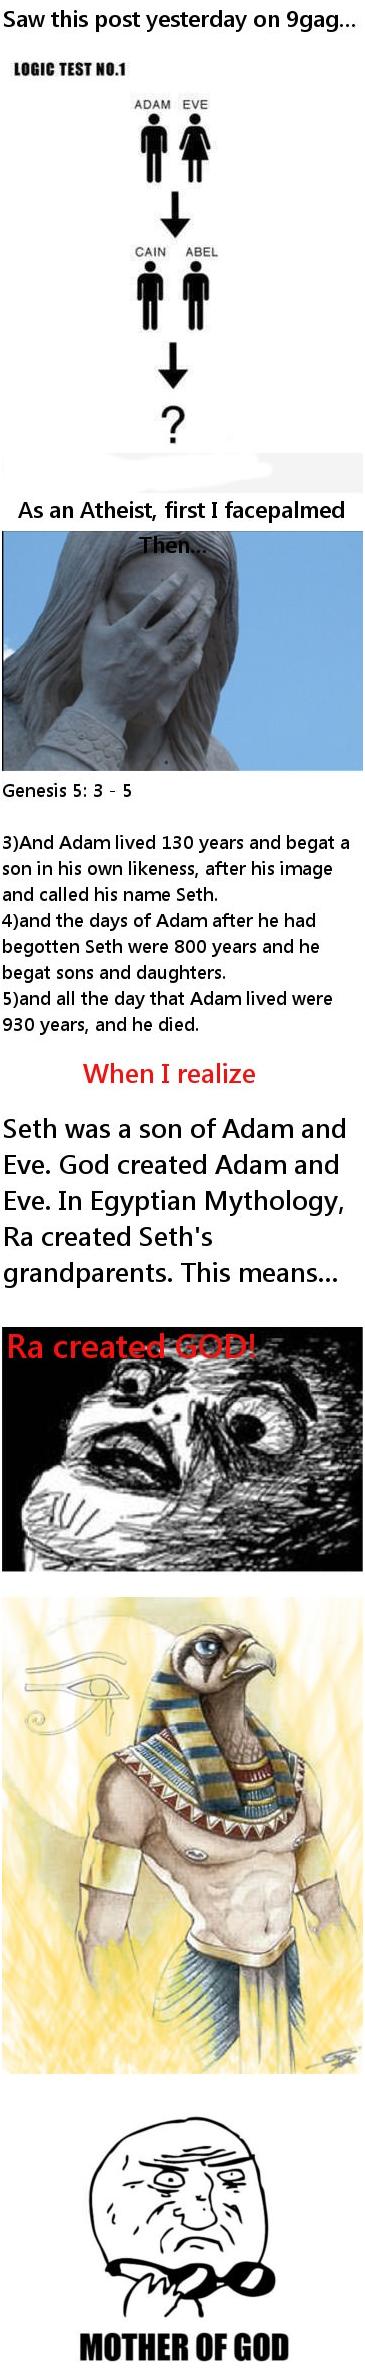 cartoon - Saw this post yesterday on 9gag... Logic Test No.1 Adam Eve Ut Cain Abel As an Atheist, first I facepalmed Then... Genesis 5 3 5 3And Adam lived 130 years and begat a son in his own ness, after his image and called his name Seth. 4and the days o